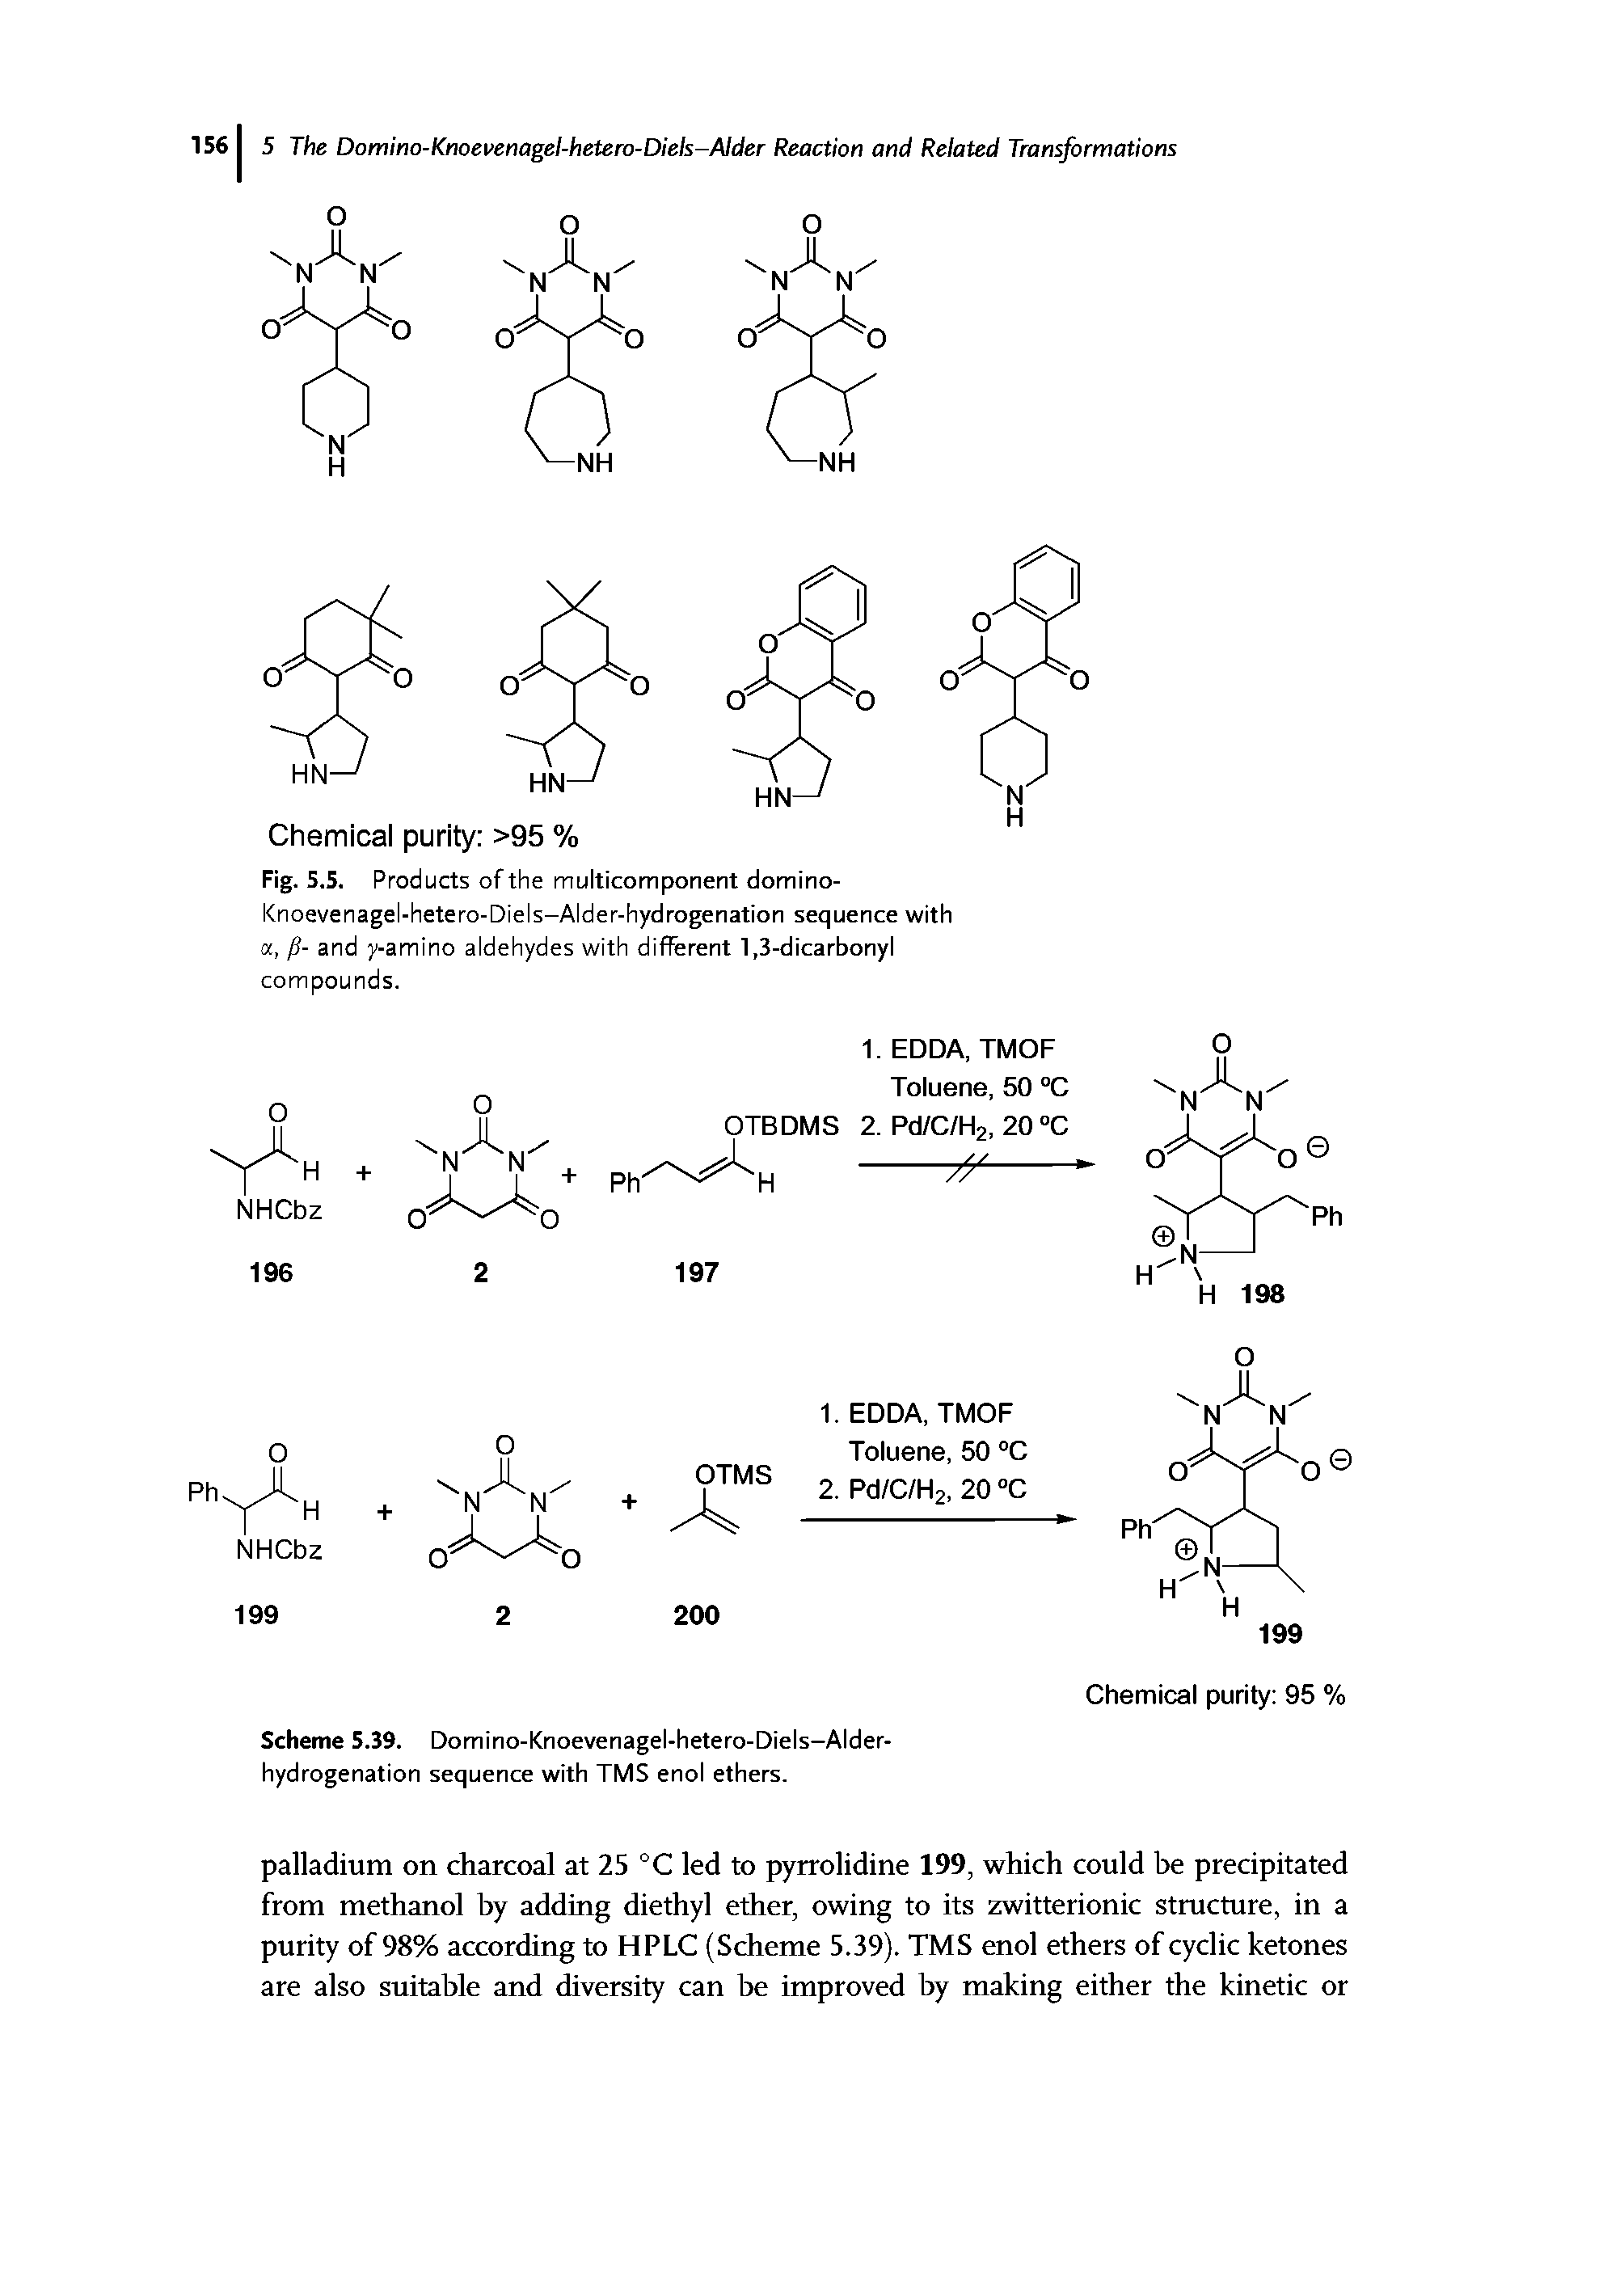 Fig. 5.5. Products of the multicomponent domino-Knoevenagel-hetero-Diels-Alder-hydrogenation sequence with a, fi- and y-amino aldehydes with different 1,3-dicarbonyl compounds.